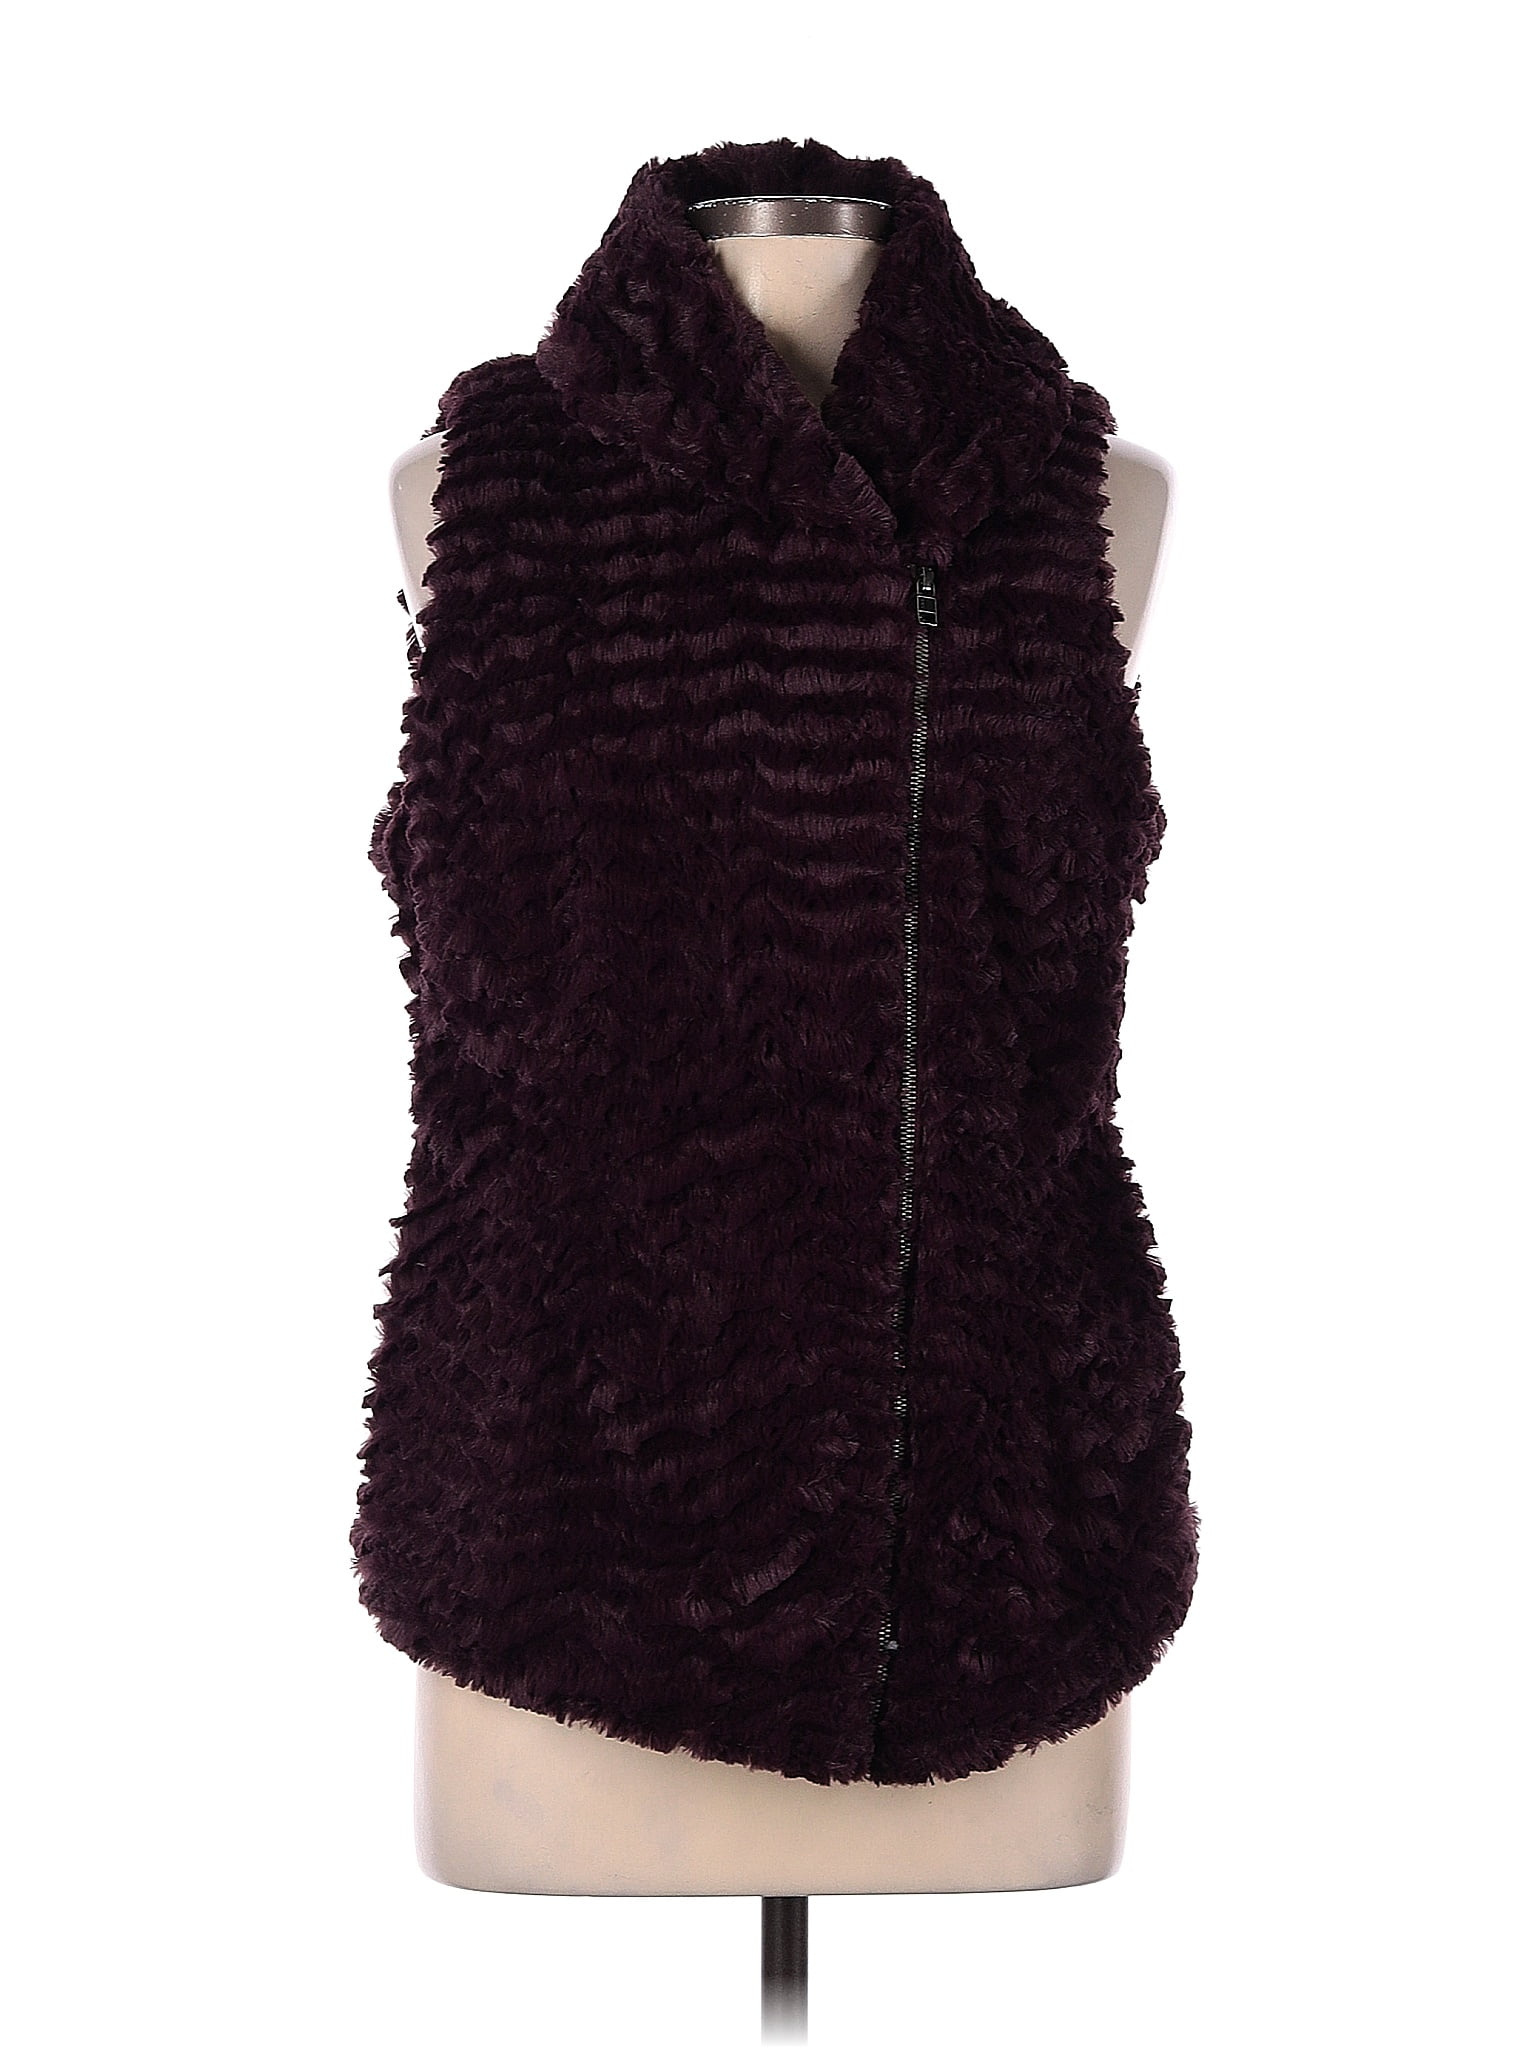 Patagonia 100% Polyester Solid Burgundy Faux Fur Vest Size L - 69% off ...